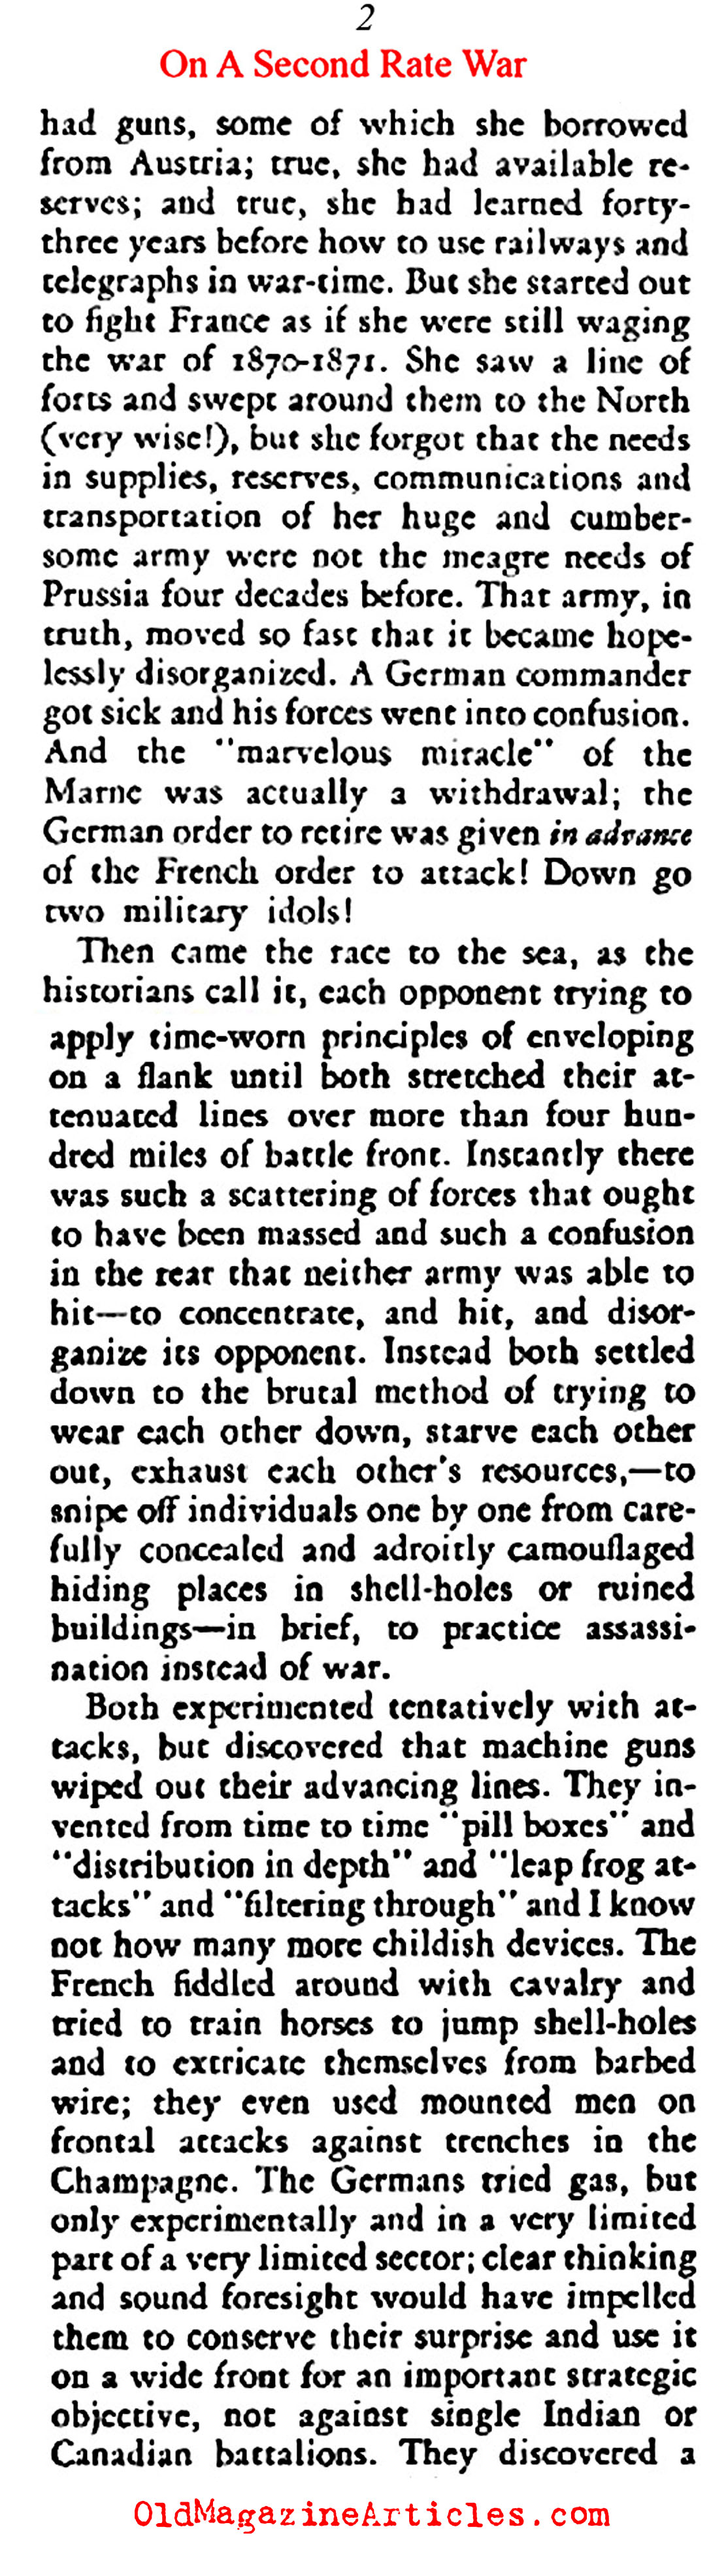 It was a Second Rate War (The American Mercury, 1924)